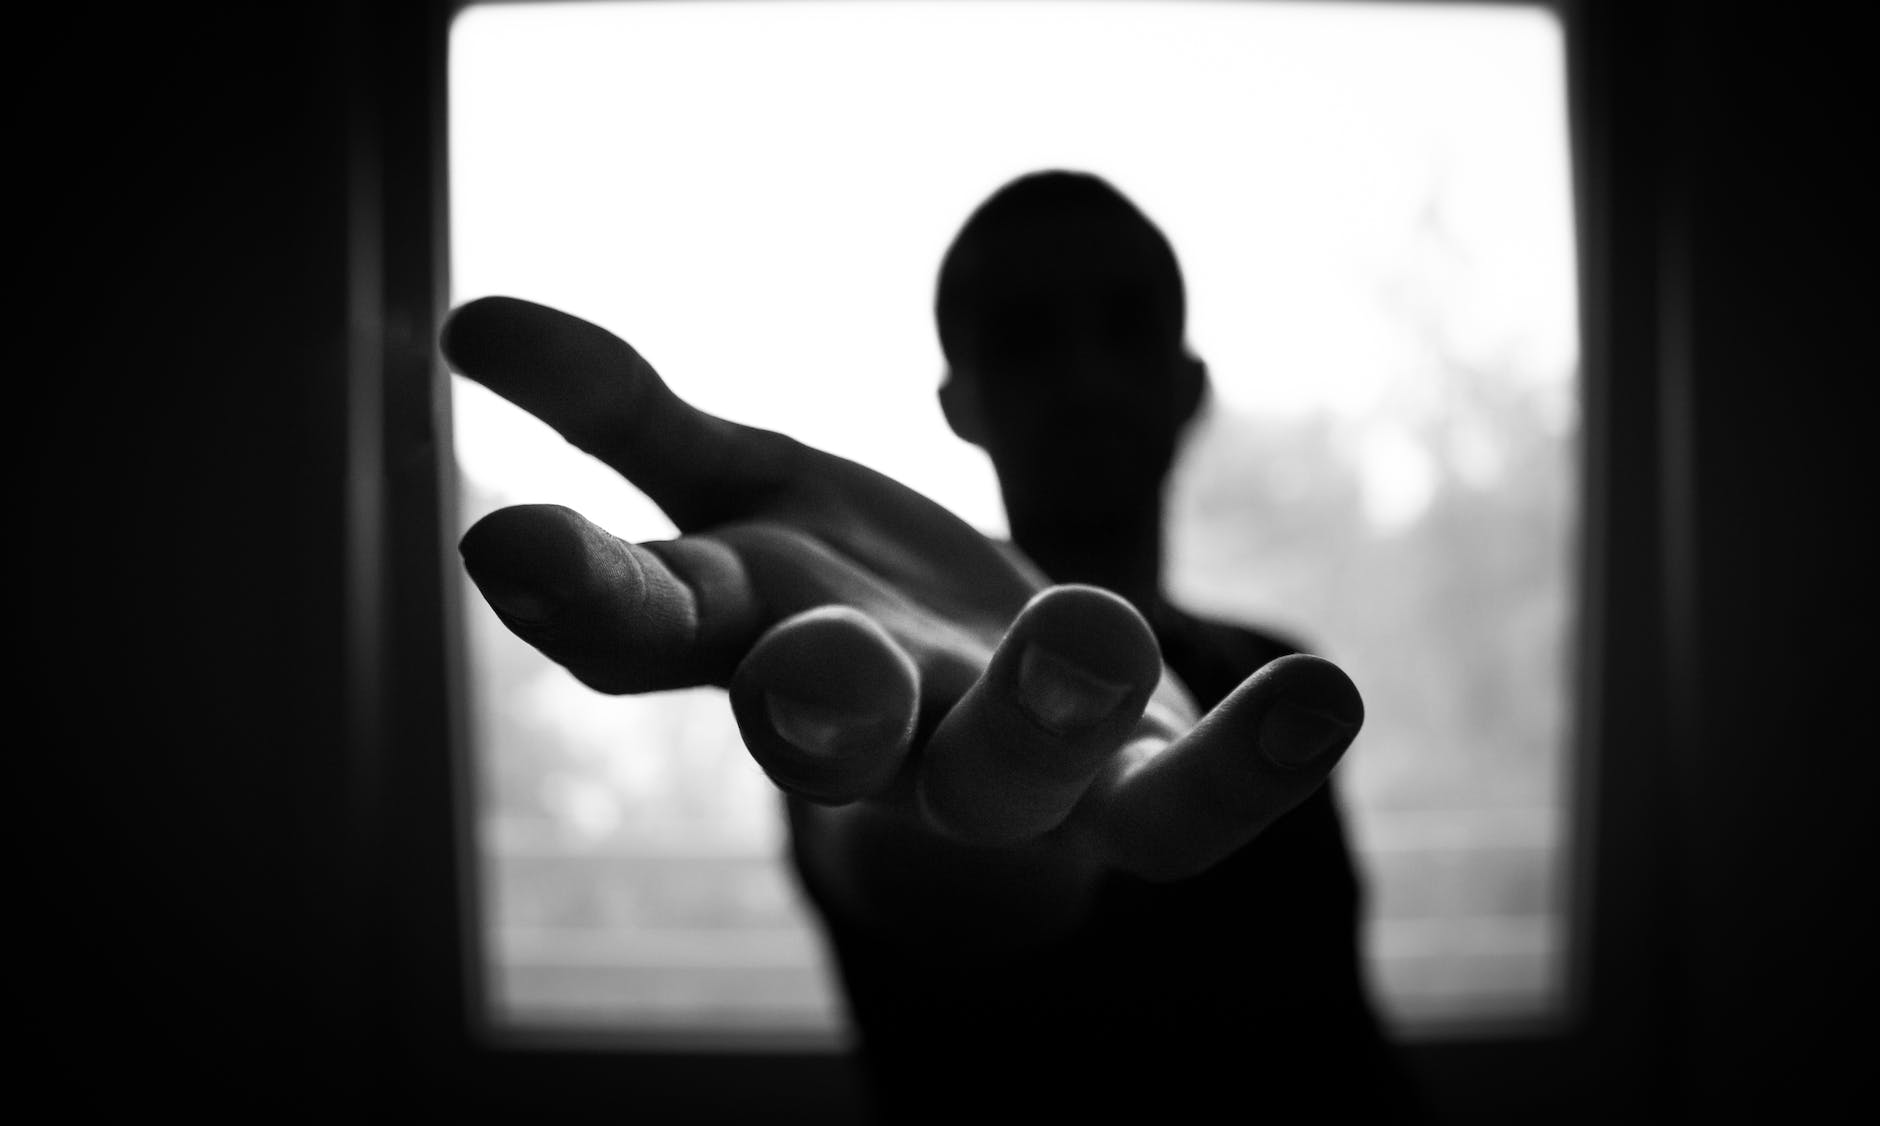 man s hand in shallow focus and grayscale photography